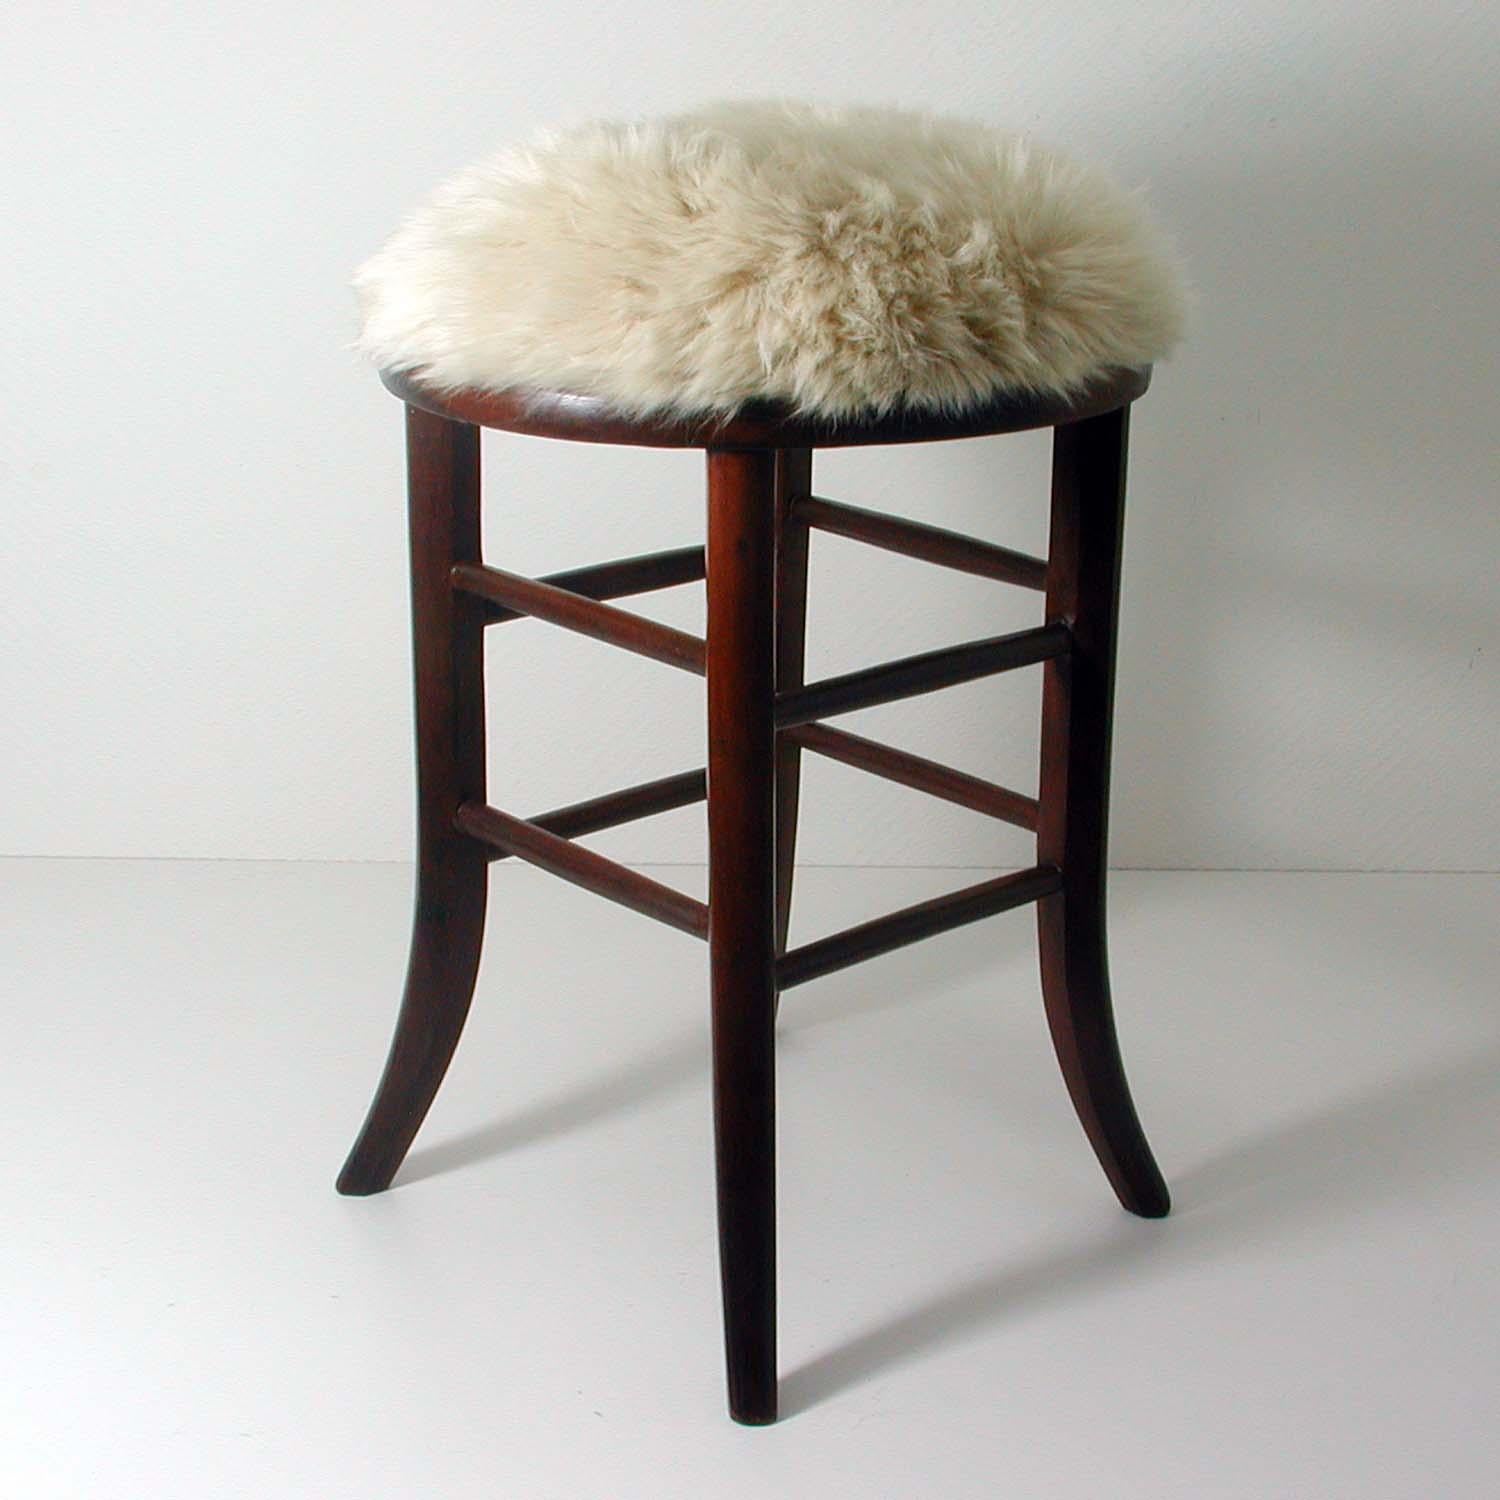 Austrian Real Iceland Cream Sheep Lamb and Walnut Upholstered Stool Chair, Austria, 1940s